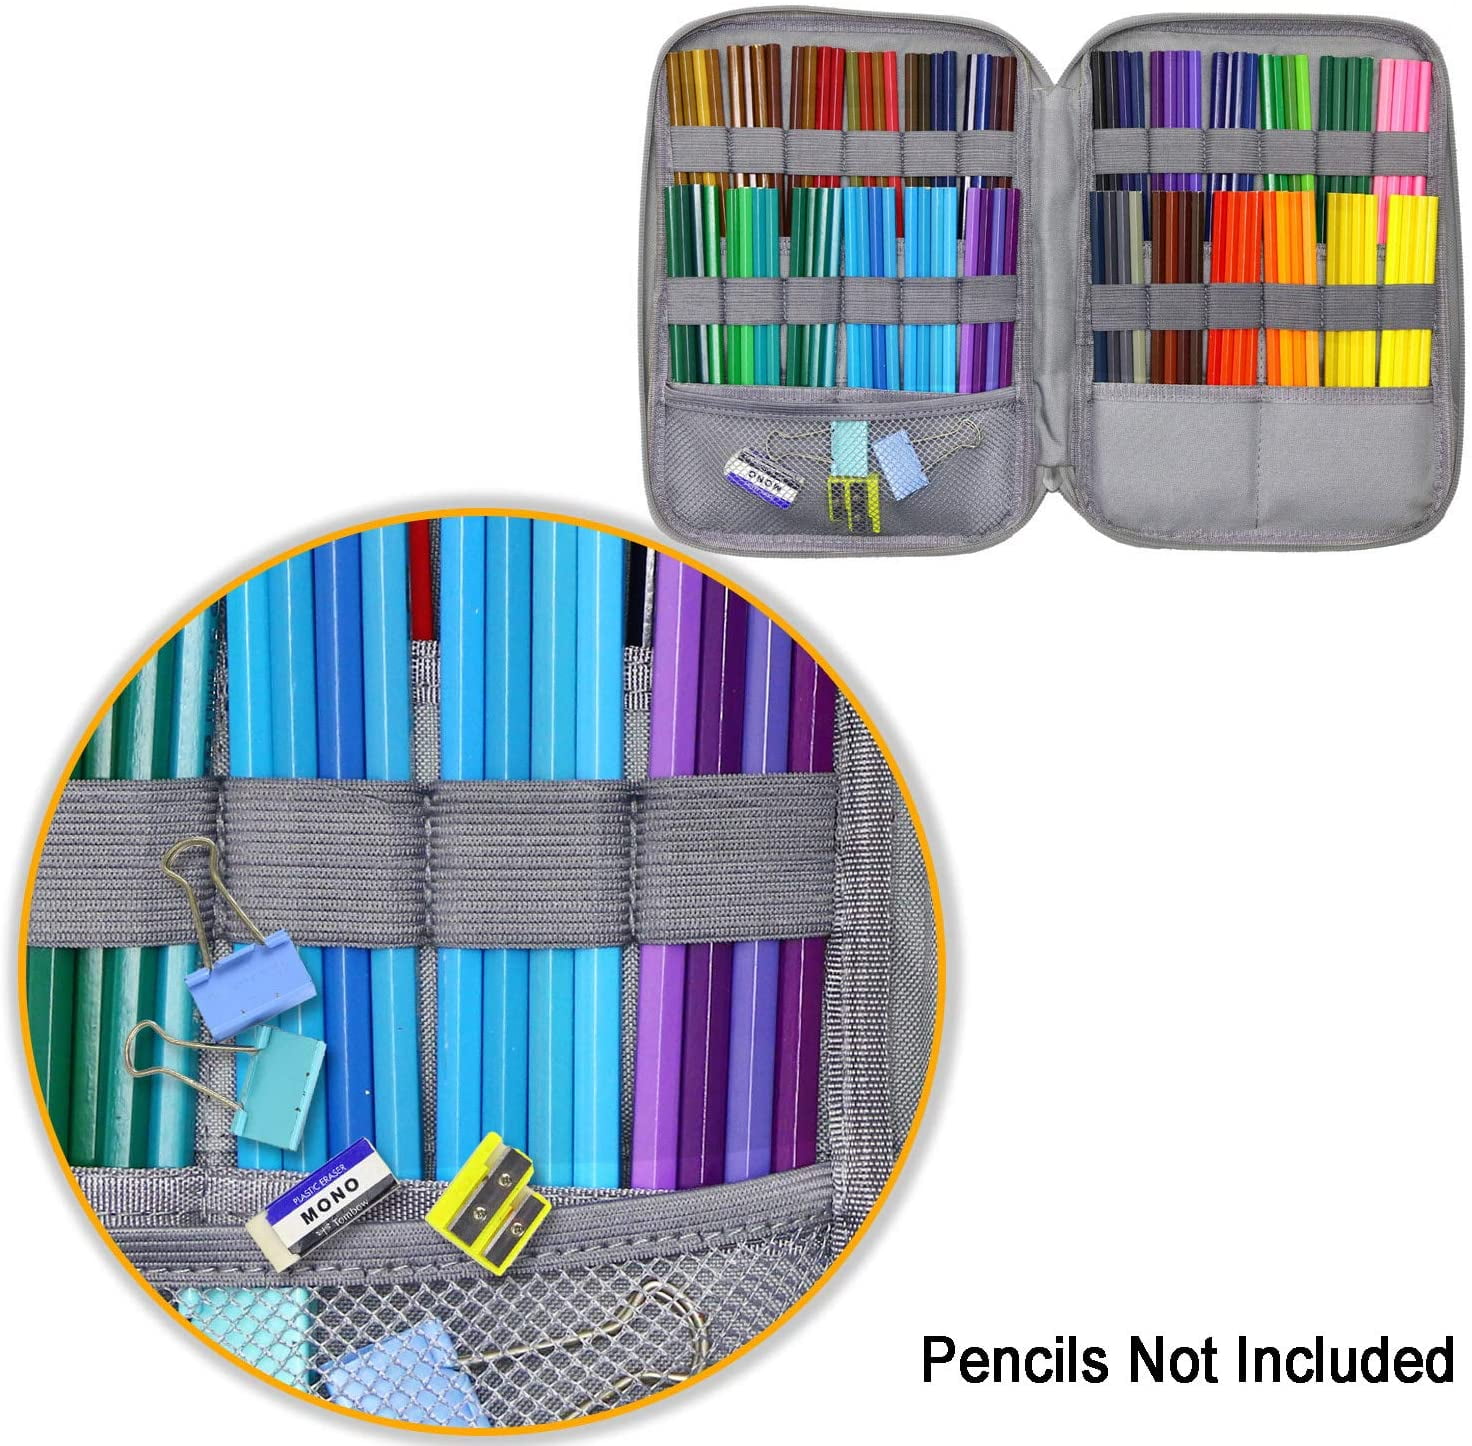 Gel Pens for Student & Artist Large Capacity Pencil Holder Pen Organizer Bag with Zipper for Prismacolor Watercolor Coloring Pencils YOUSHARES 96 Slots Colored Pencil Case Animal Graffiti 